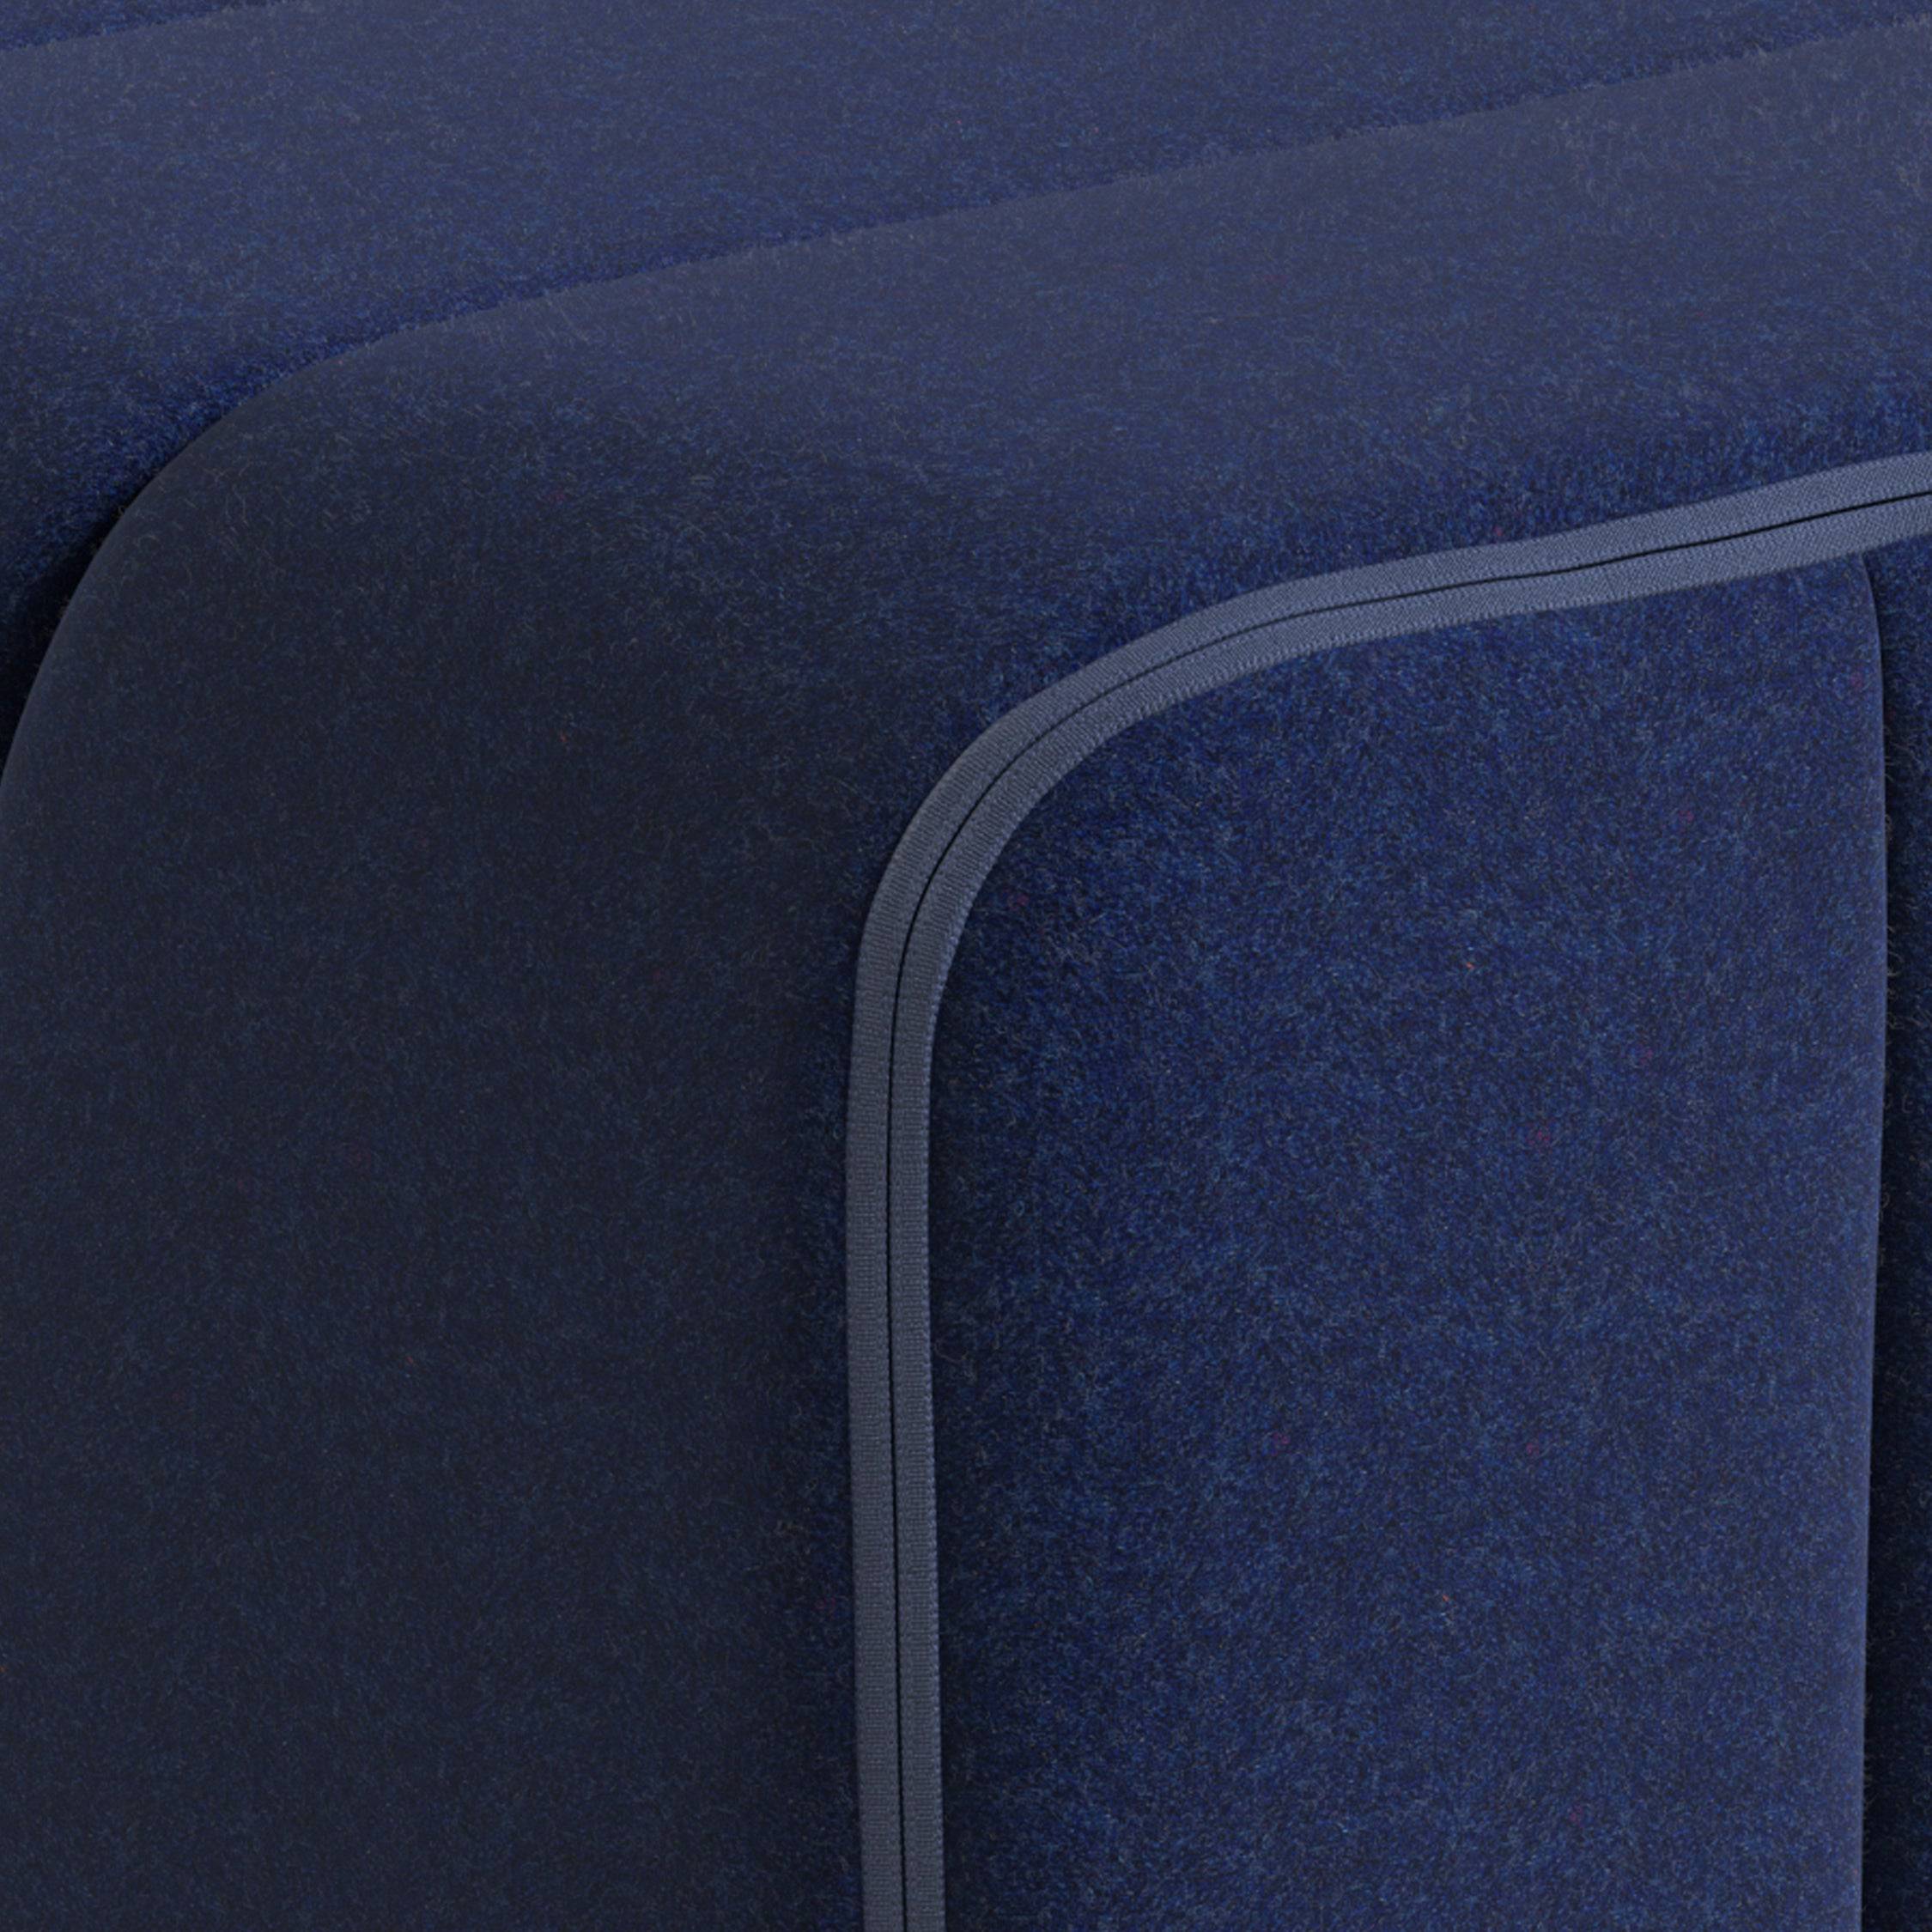 Curt Sofa System - Blue - THAT COOL LIVING